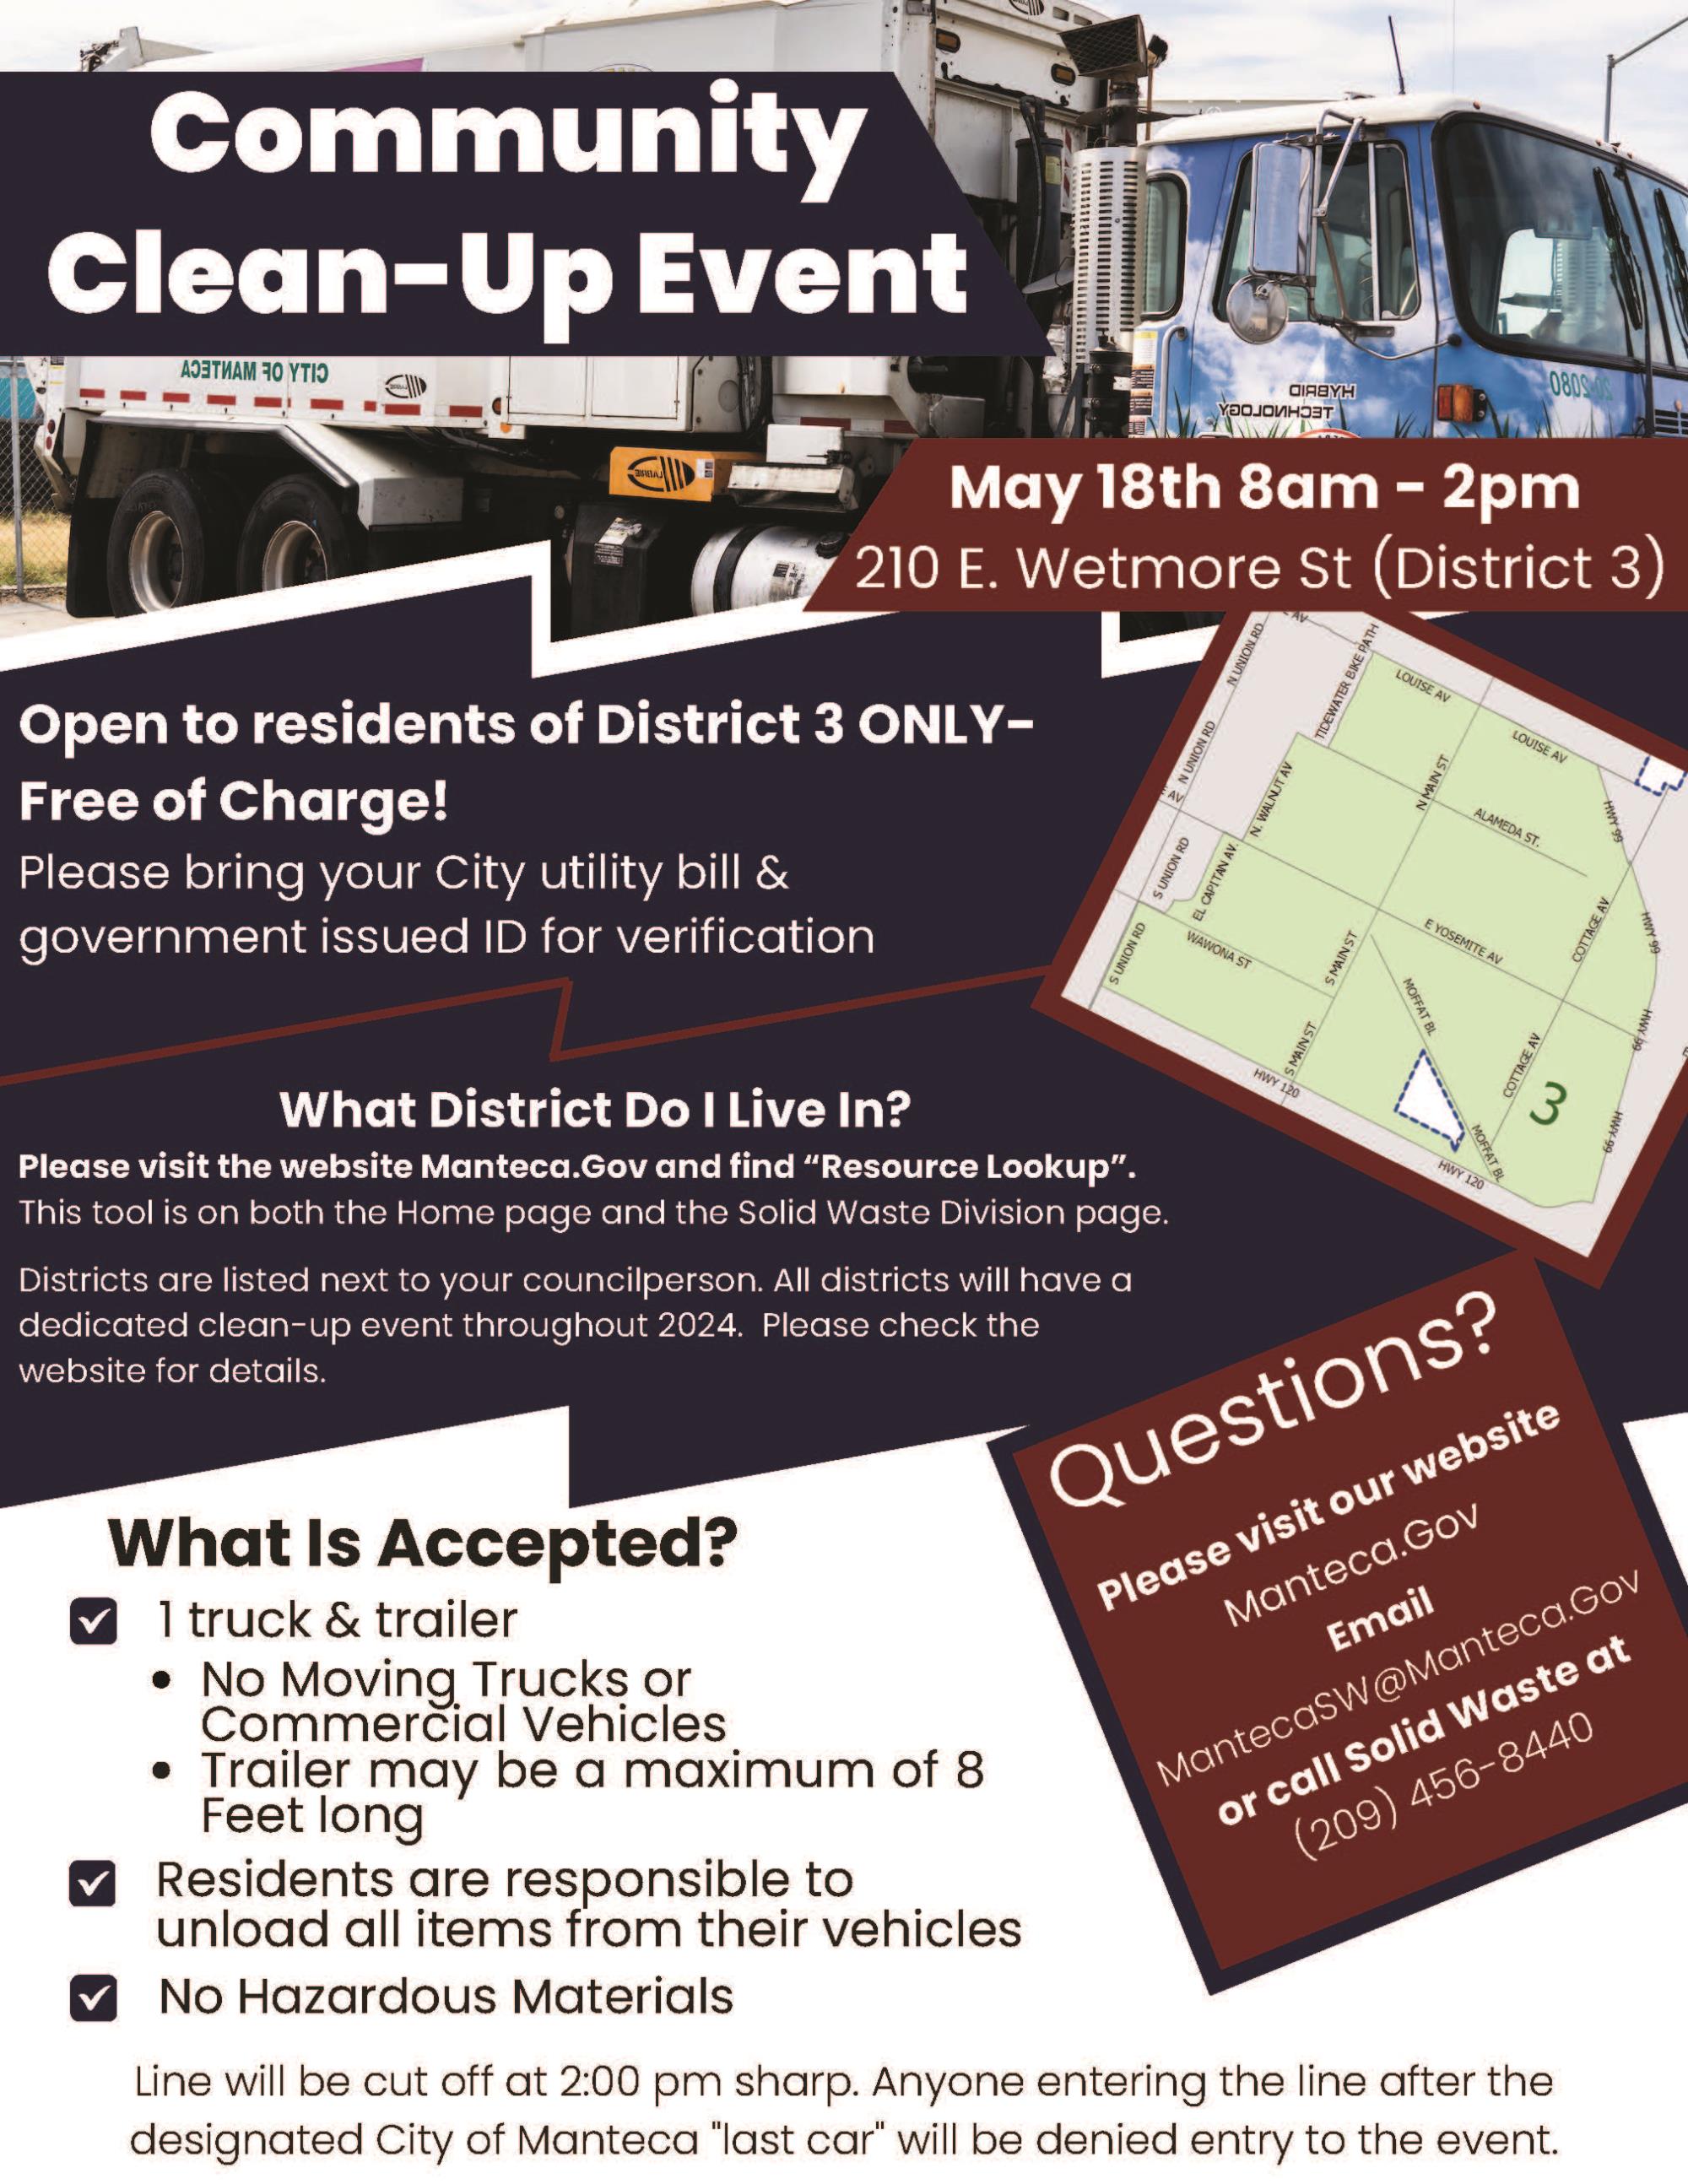 District 3 Community Clean Up Event